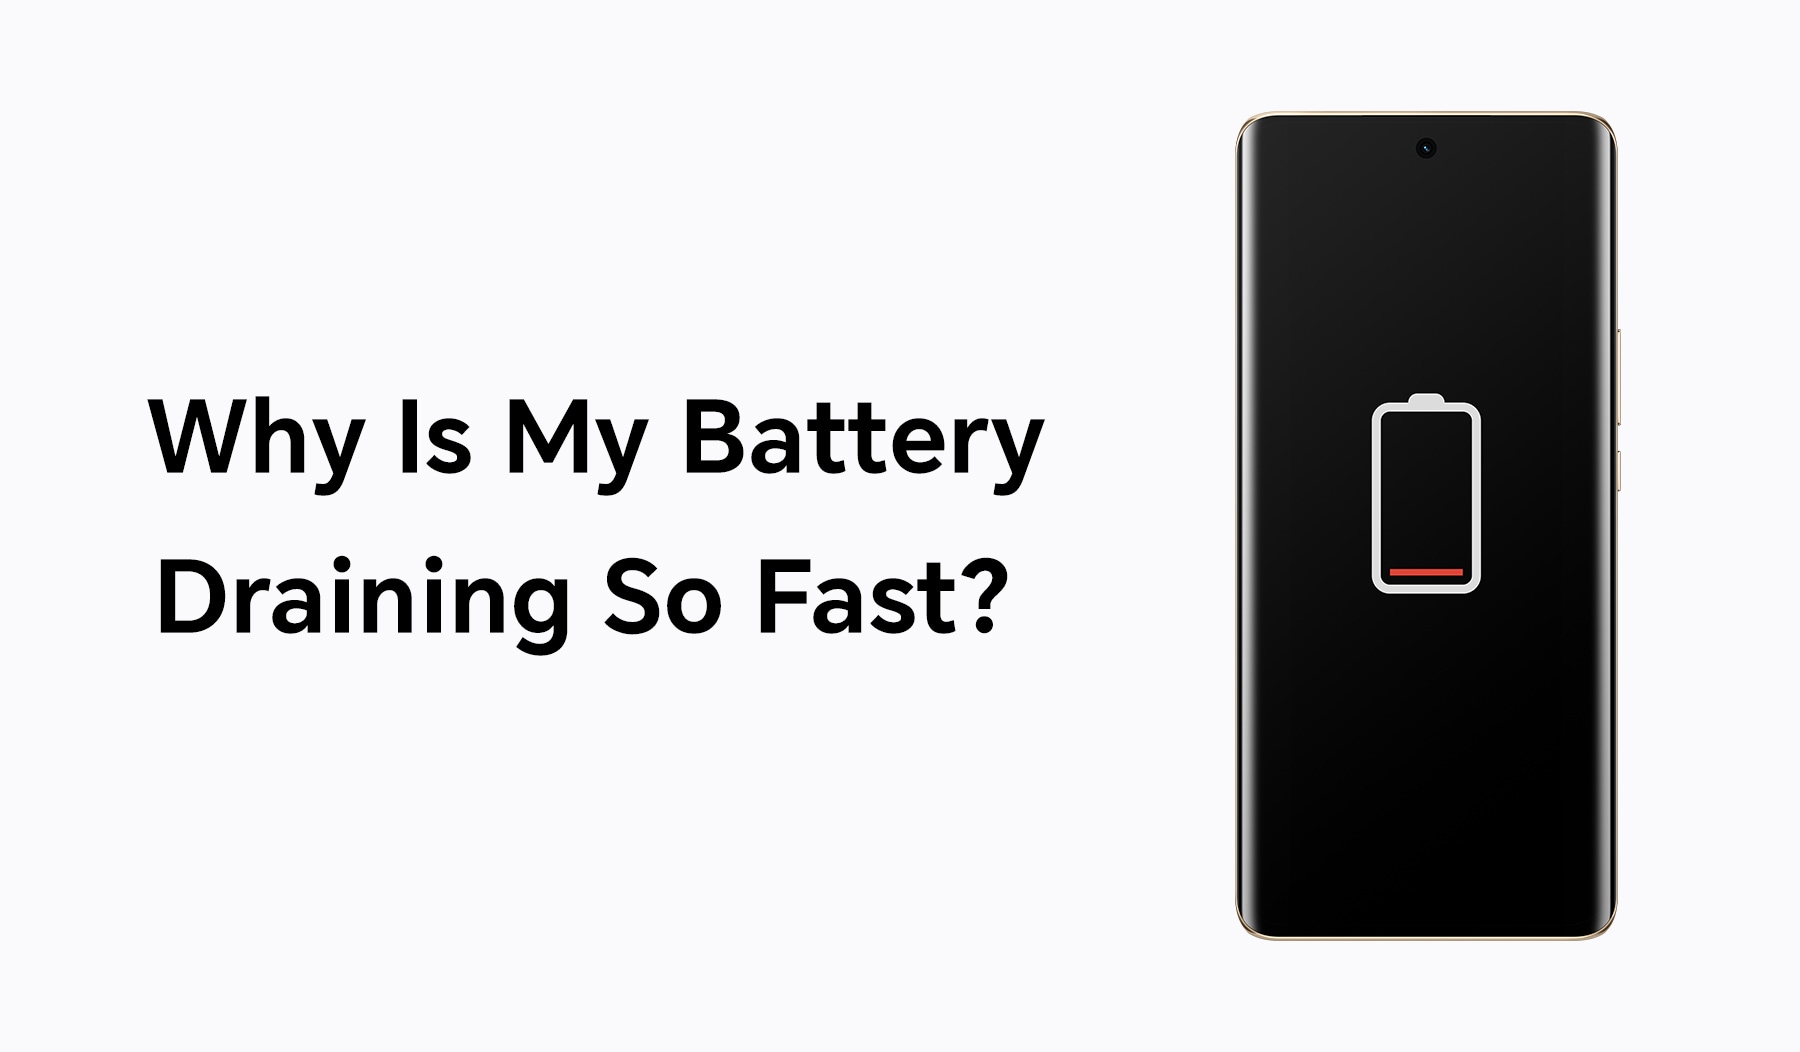 Why Is My Battery Draining So Fast?